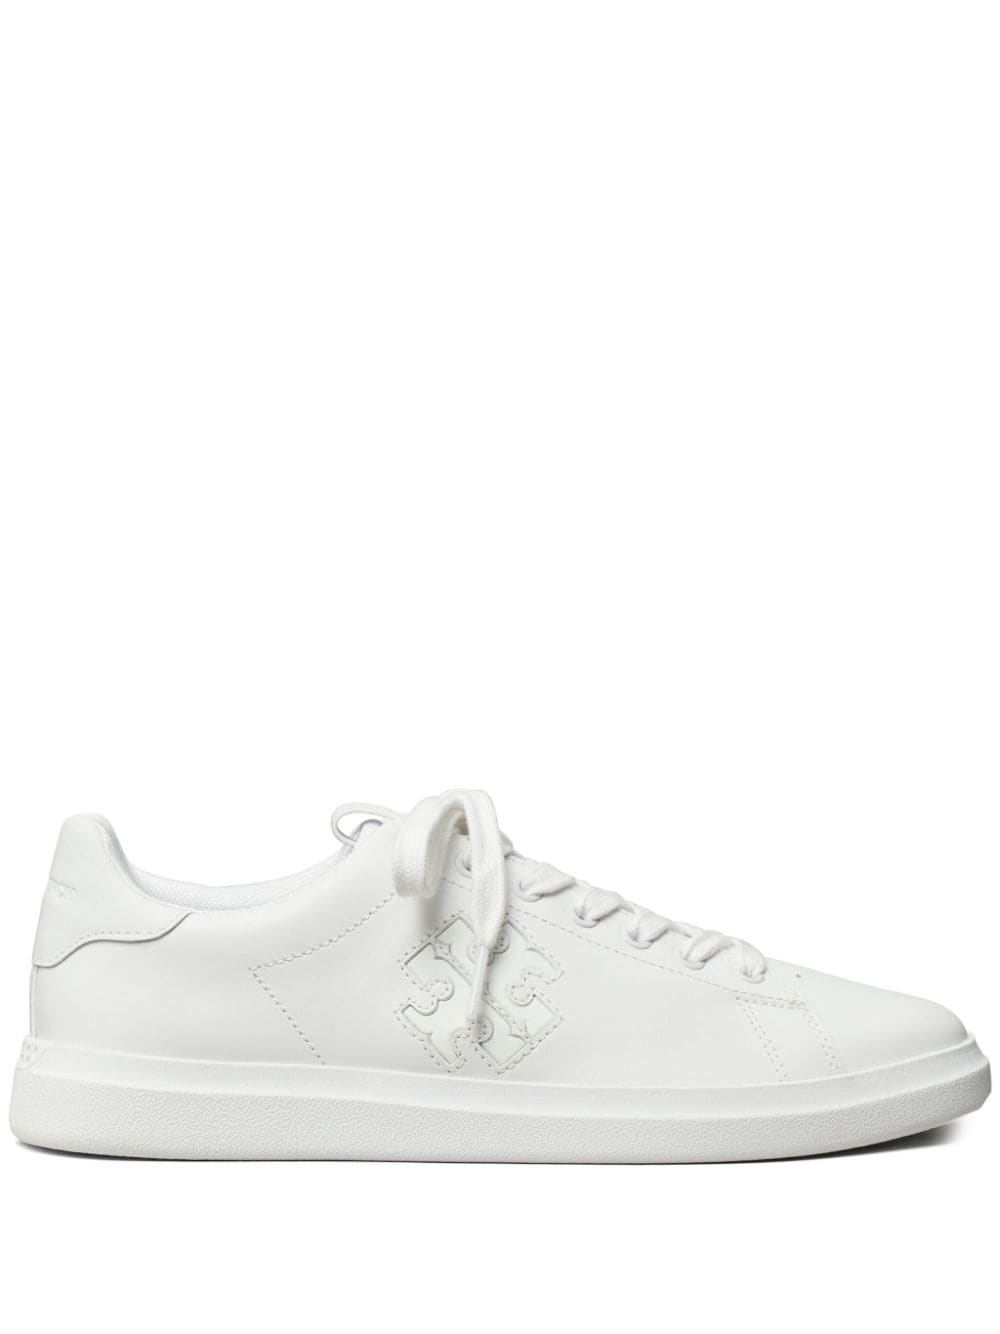 Image 1 of Tory Burch Double T Howell Sneakers